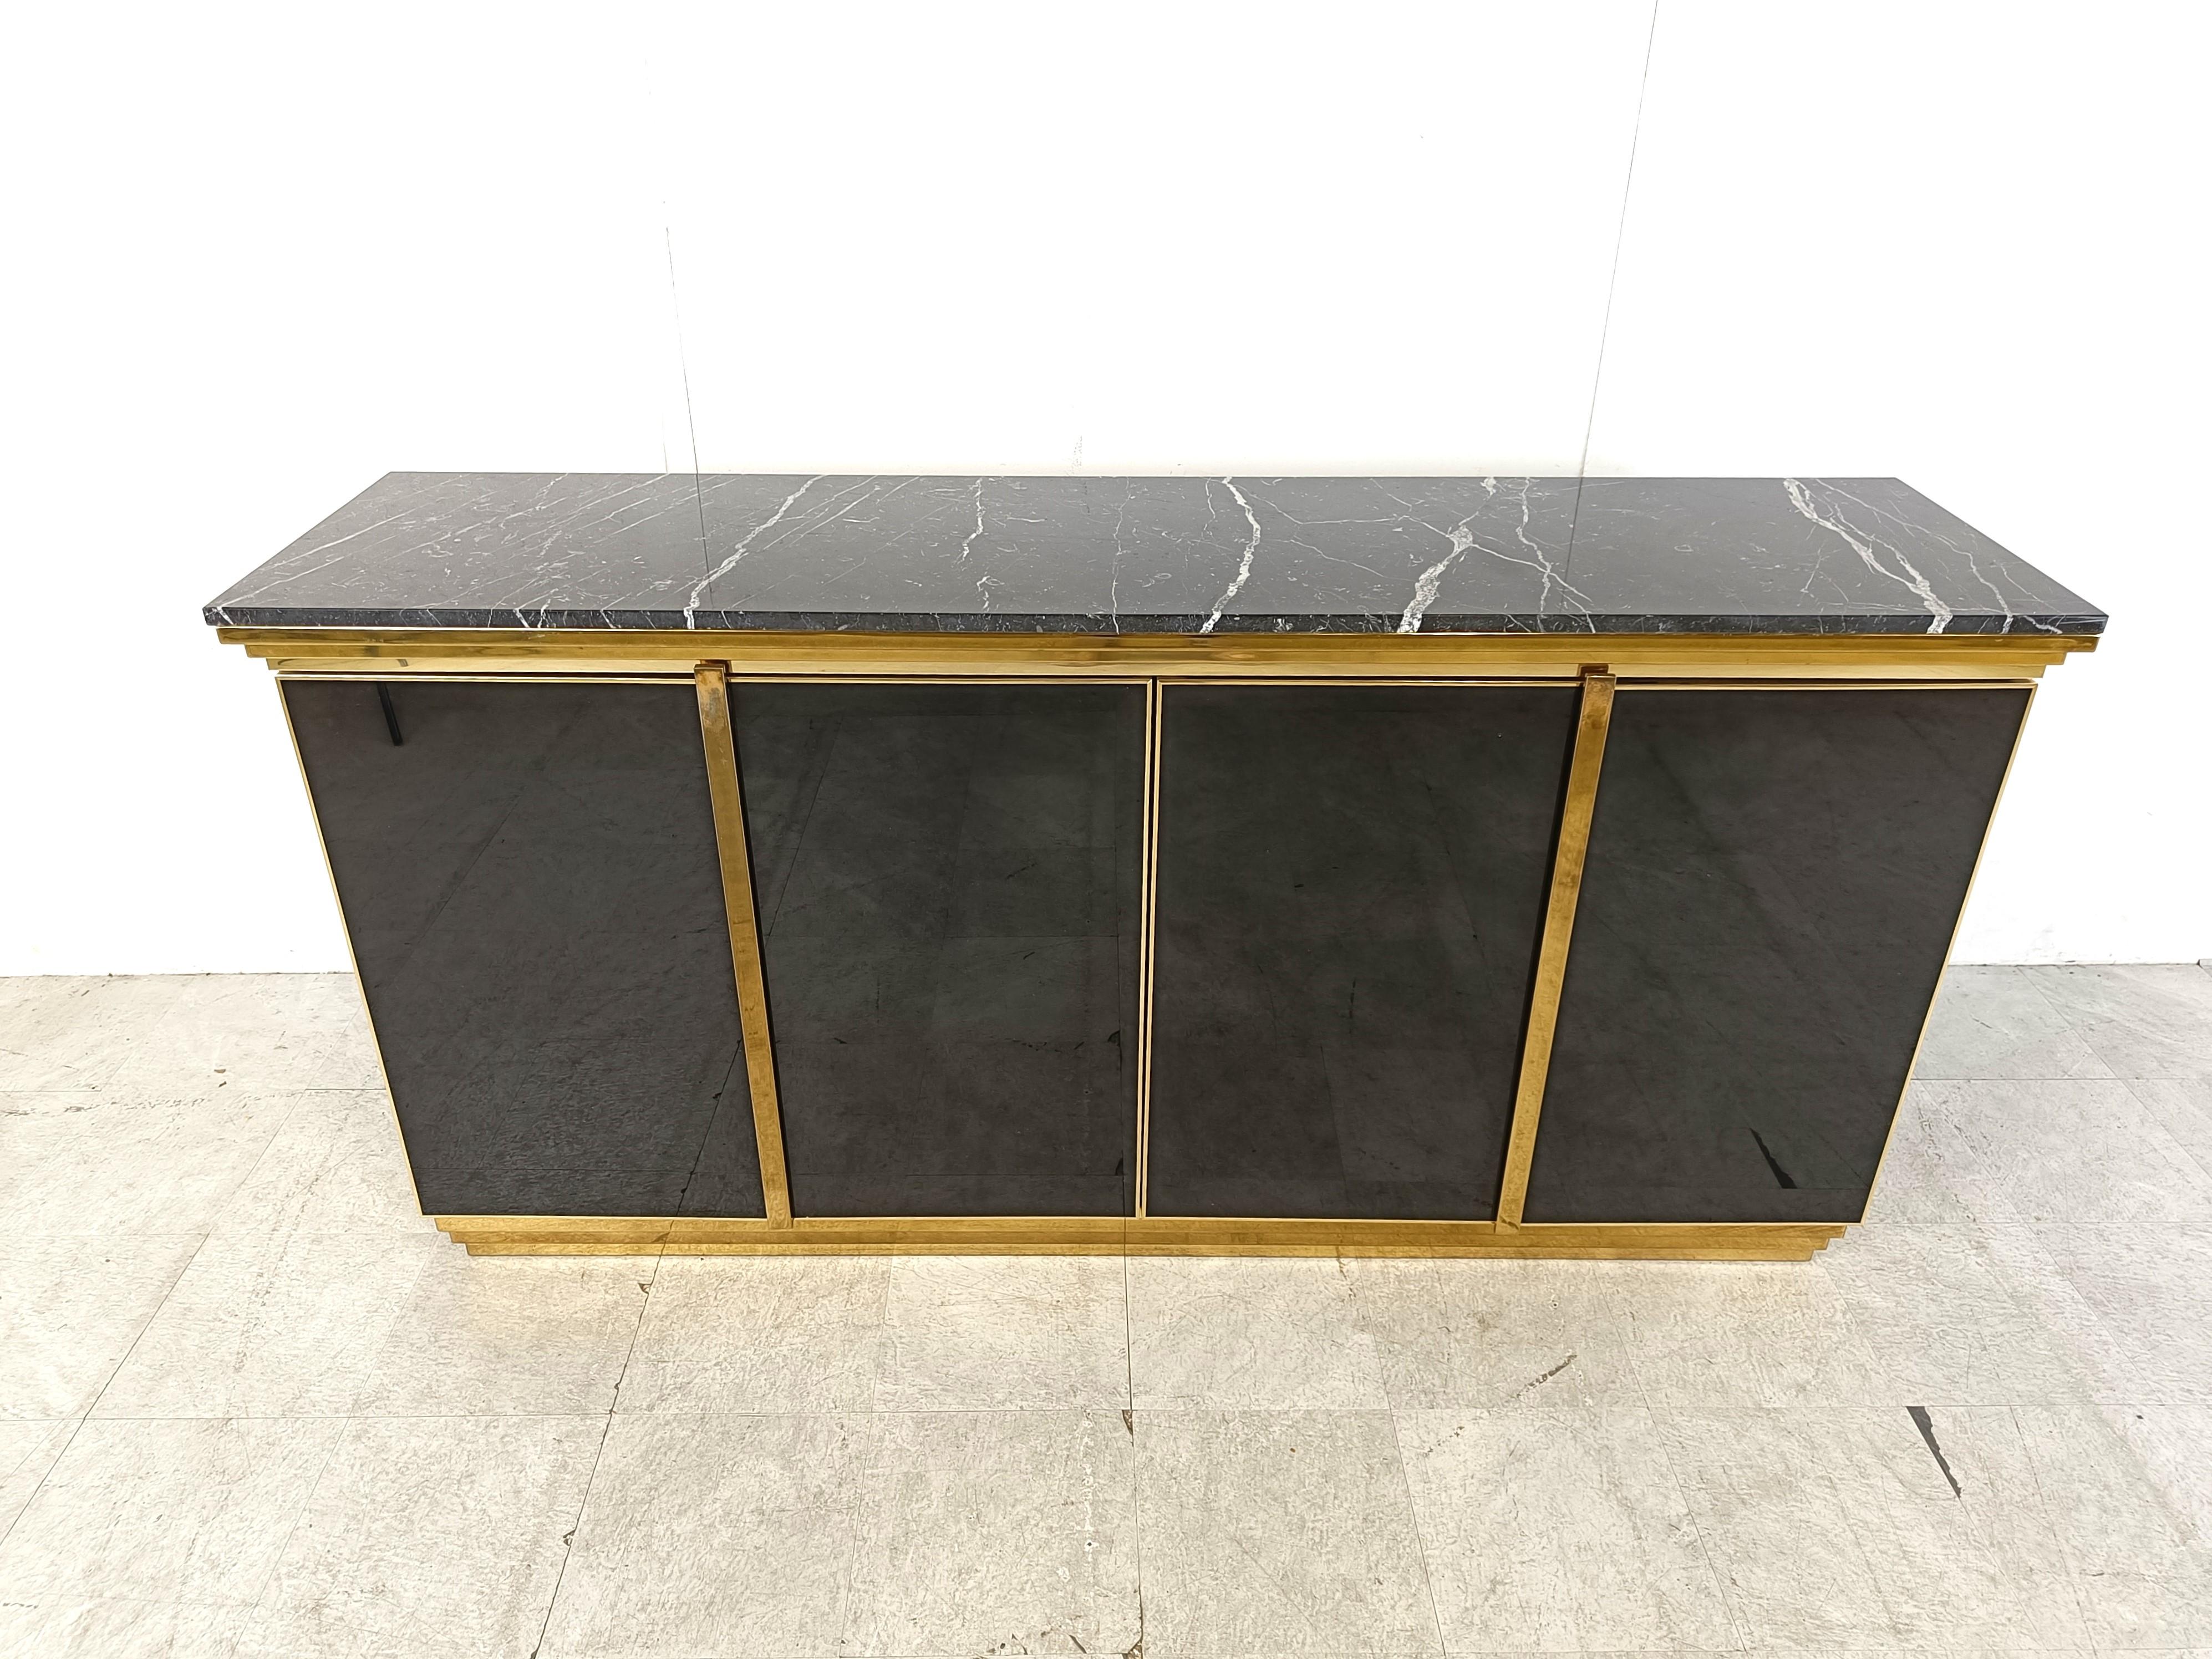 Luxurious seventies glamour sideboard in the manner of Maison Jansen consisting of black glass panels, brass hardware and a black marble top.

The use of different high quality materials makes this piece a real eye catcher.

It also provides a lot